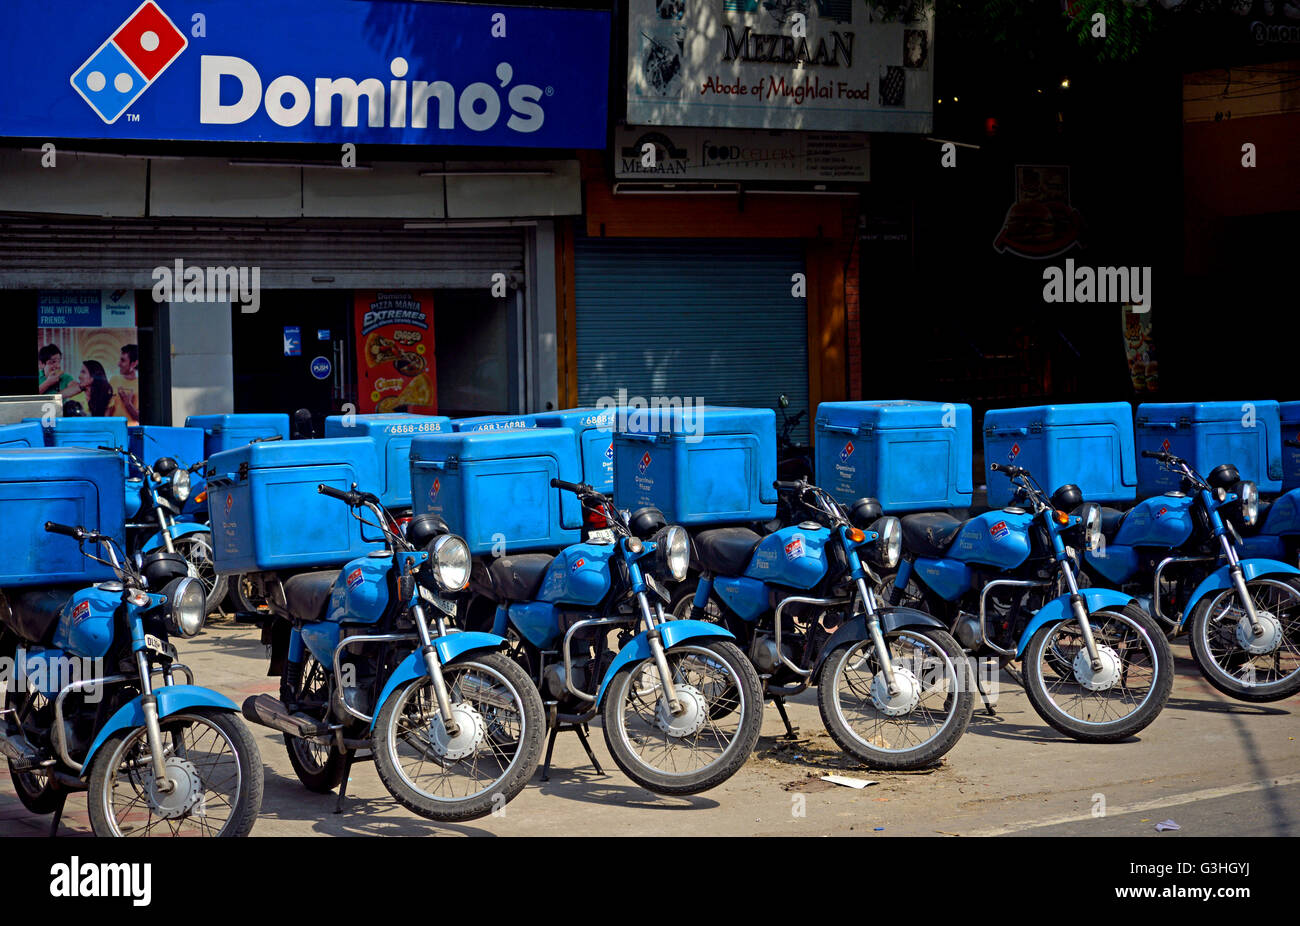 Domino's Restaurant With Delivery bikes Stock Photo